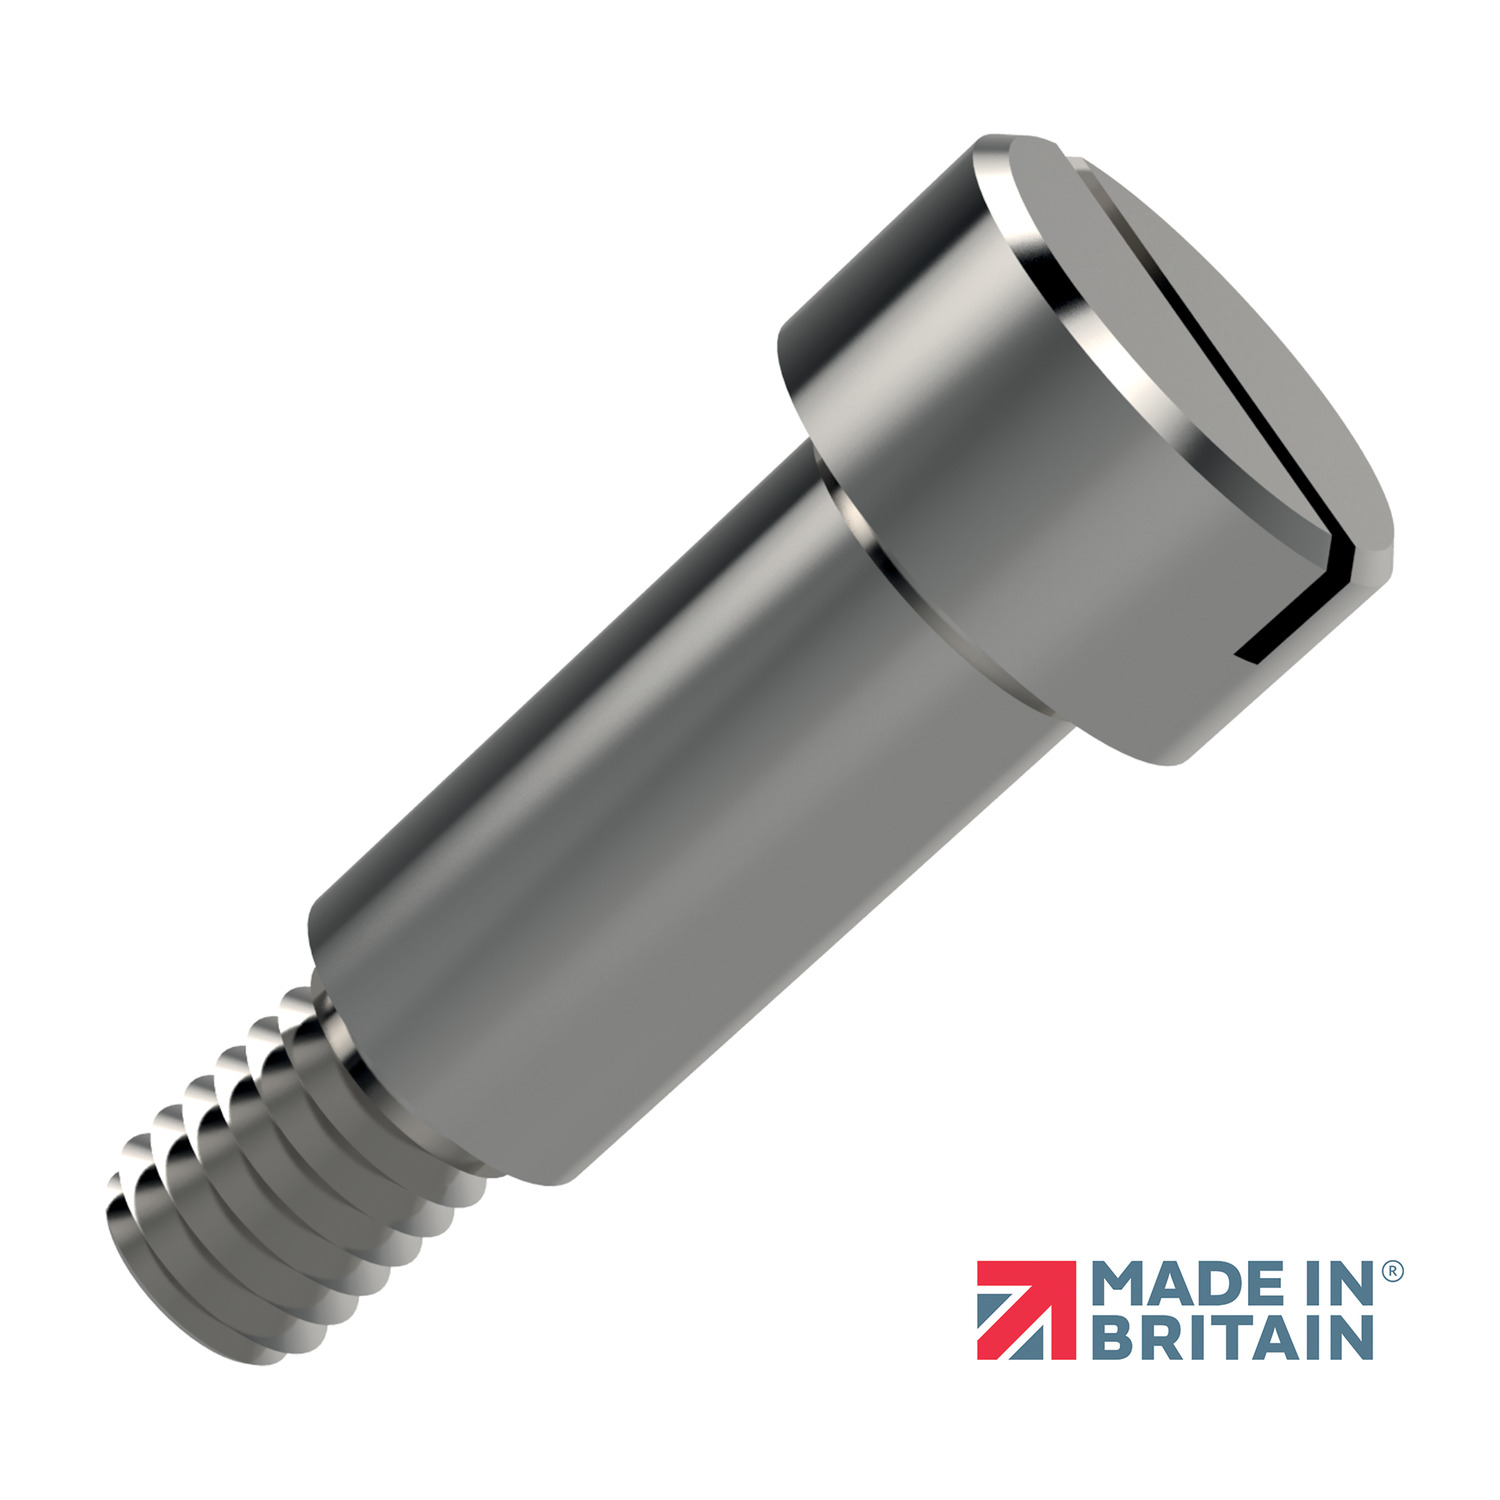 Inch Shoulder Screws - Cap Head Our slotted stainless steel shoulder screws are also available with imperial (inch) dimensions.